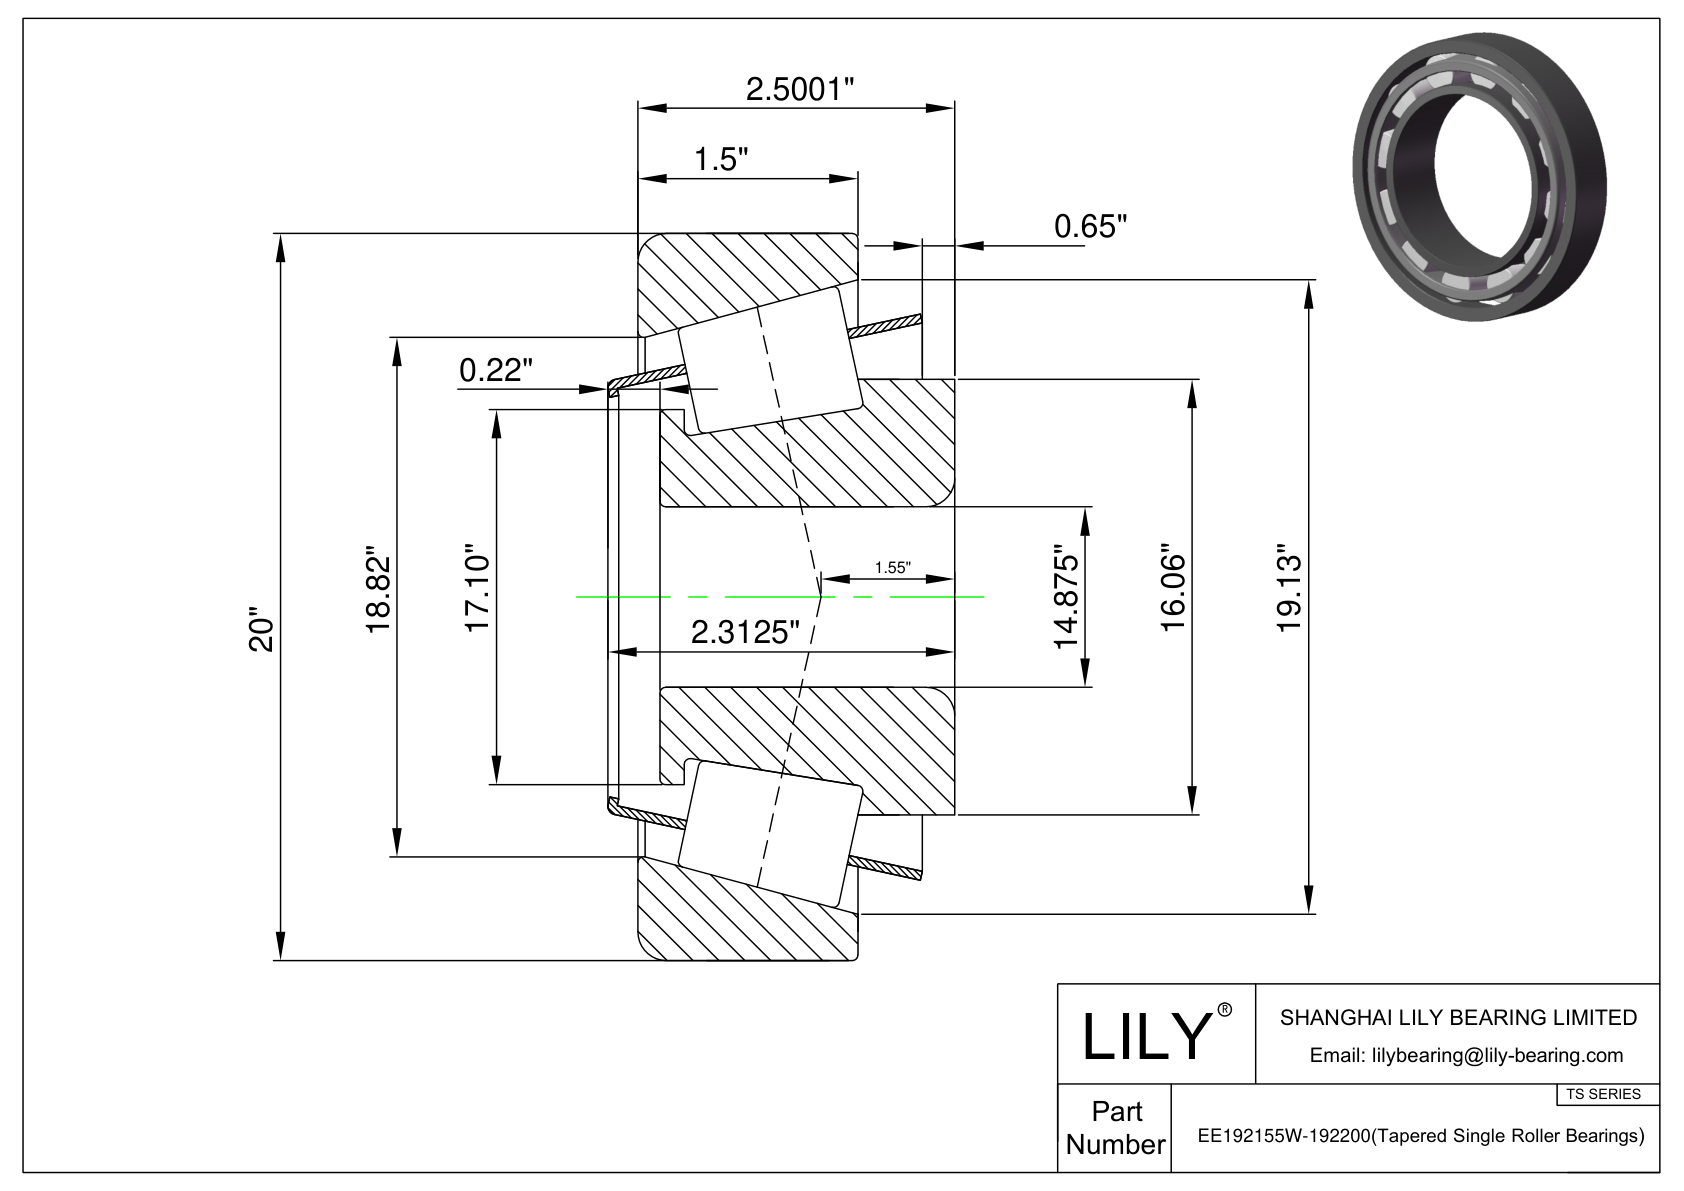 EE192155W-192200 TS (Tapered Single Roller Bearings) (Imperial) cad drawing